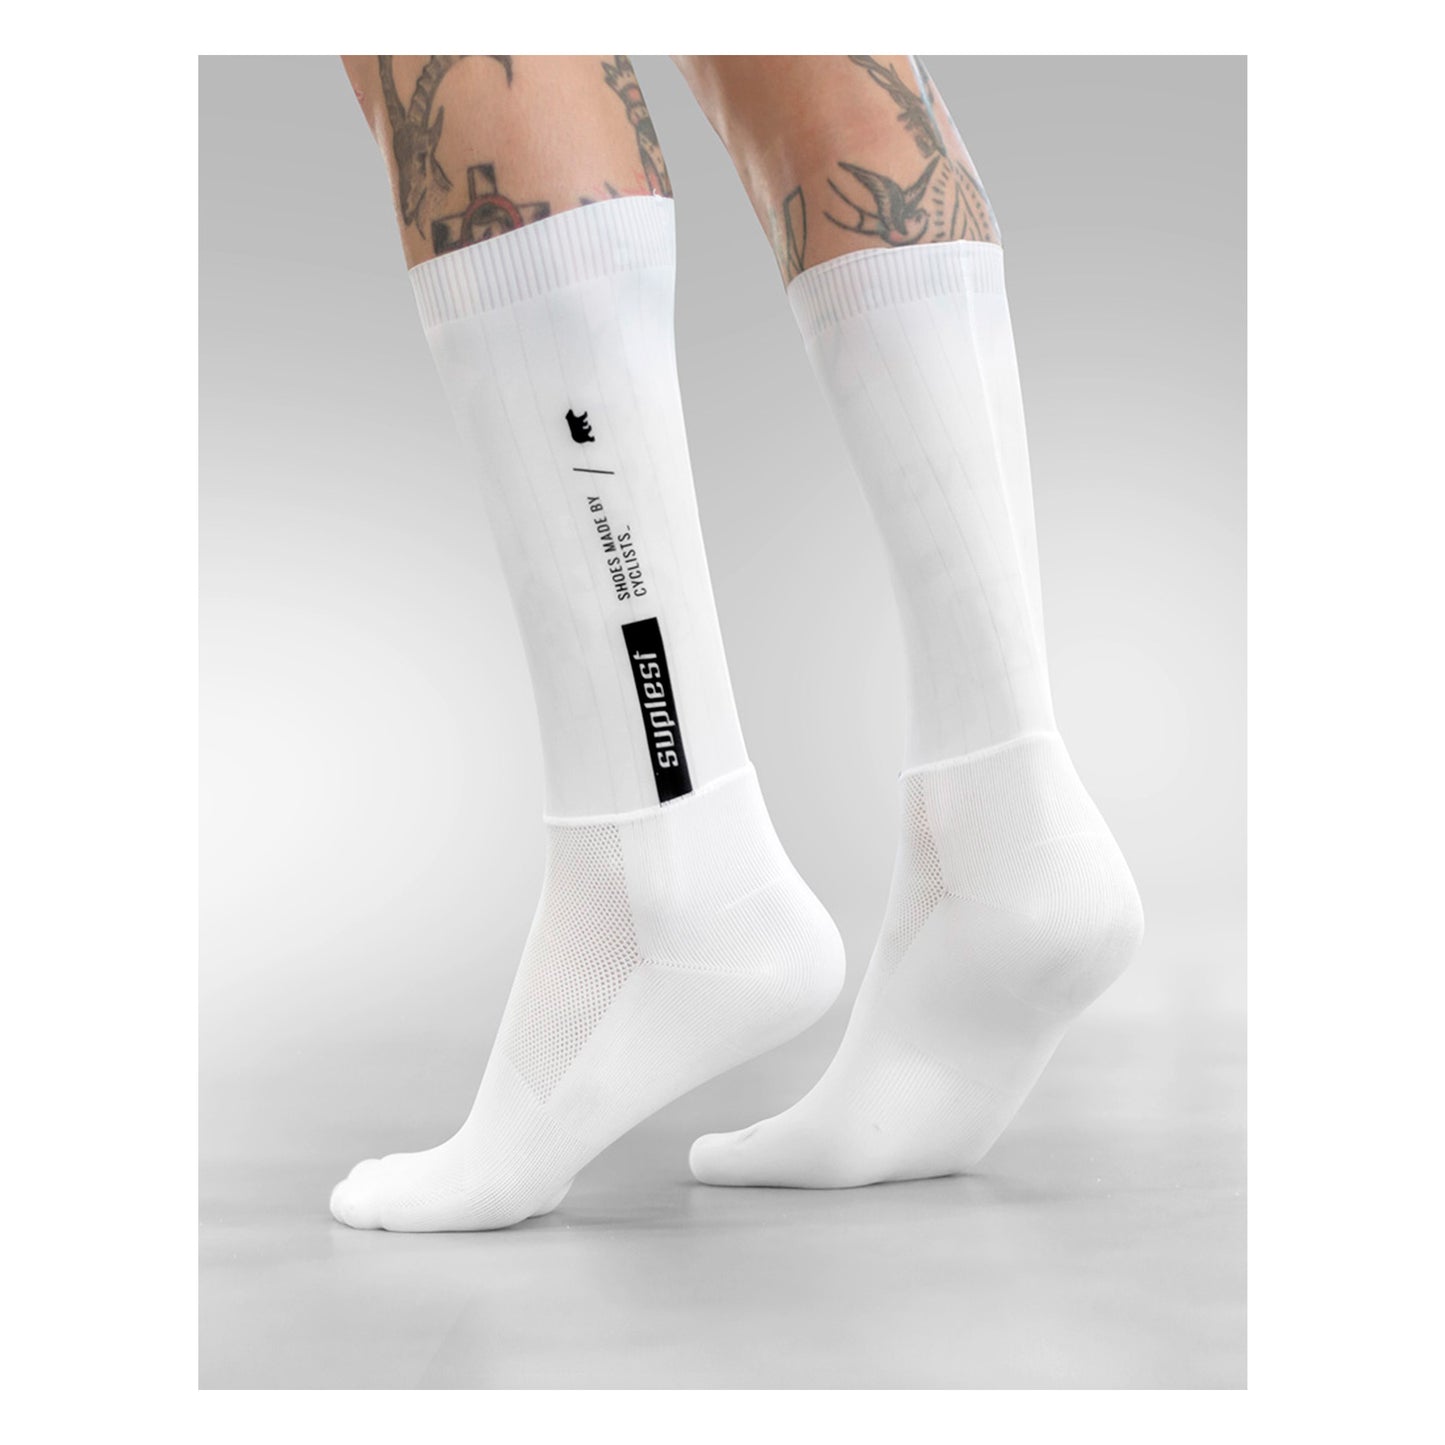 Aerosocks from Suplest from Ascender Cycling Club Switzerland Live View Side